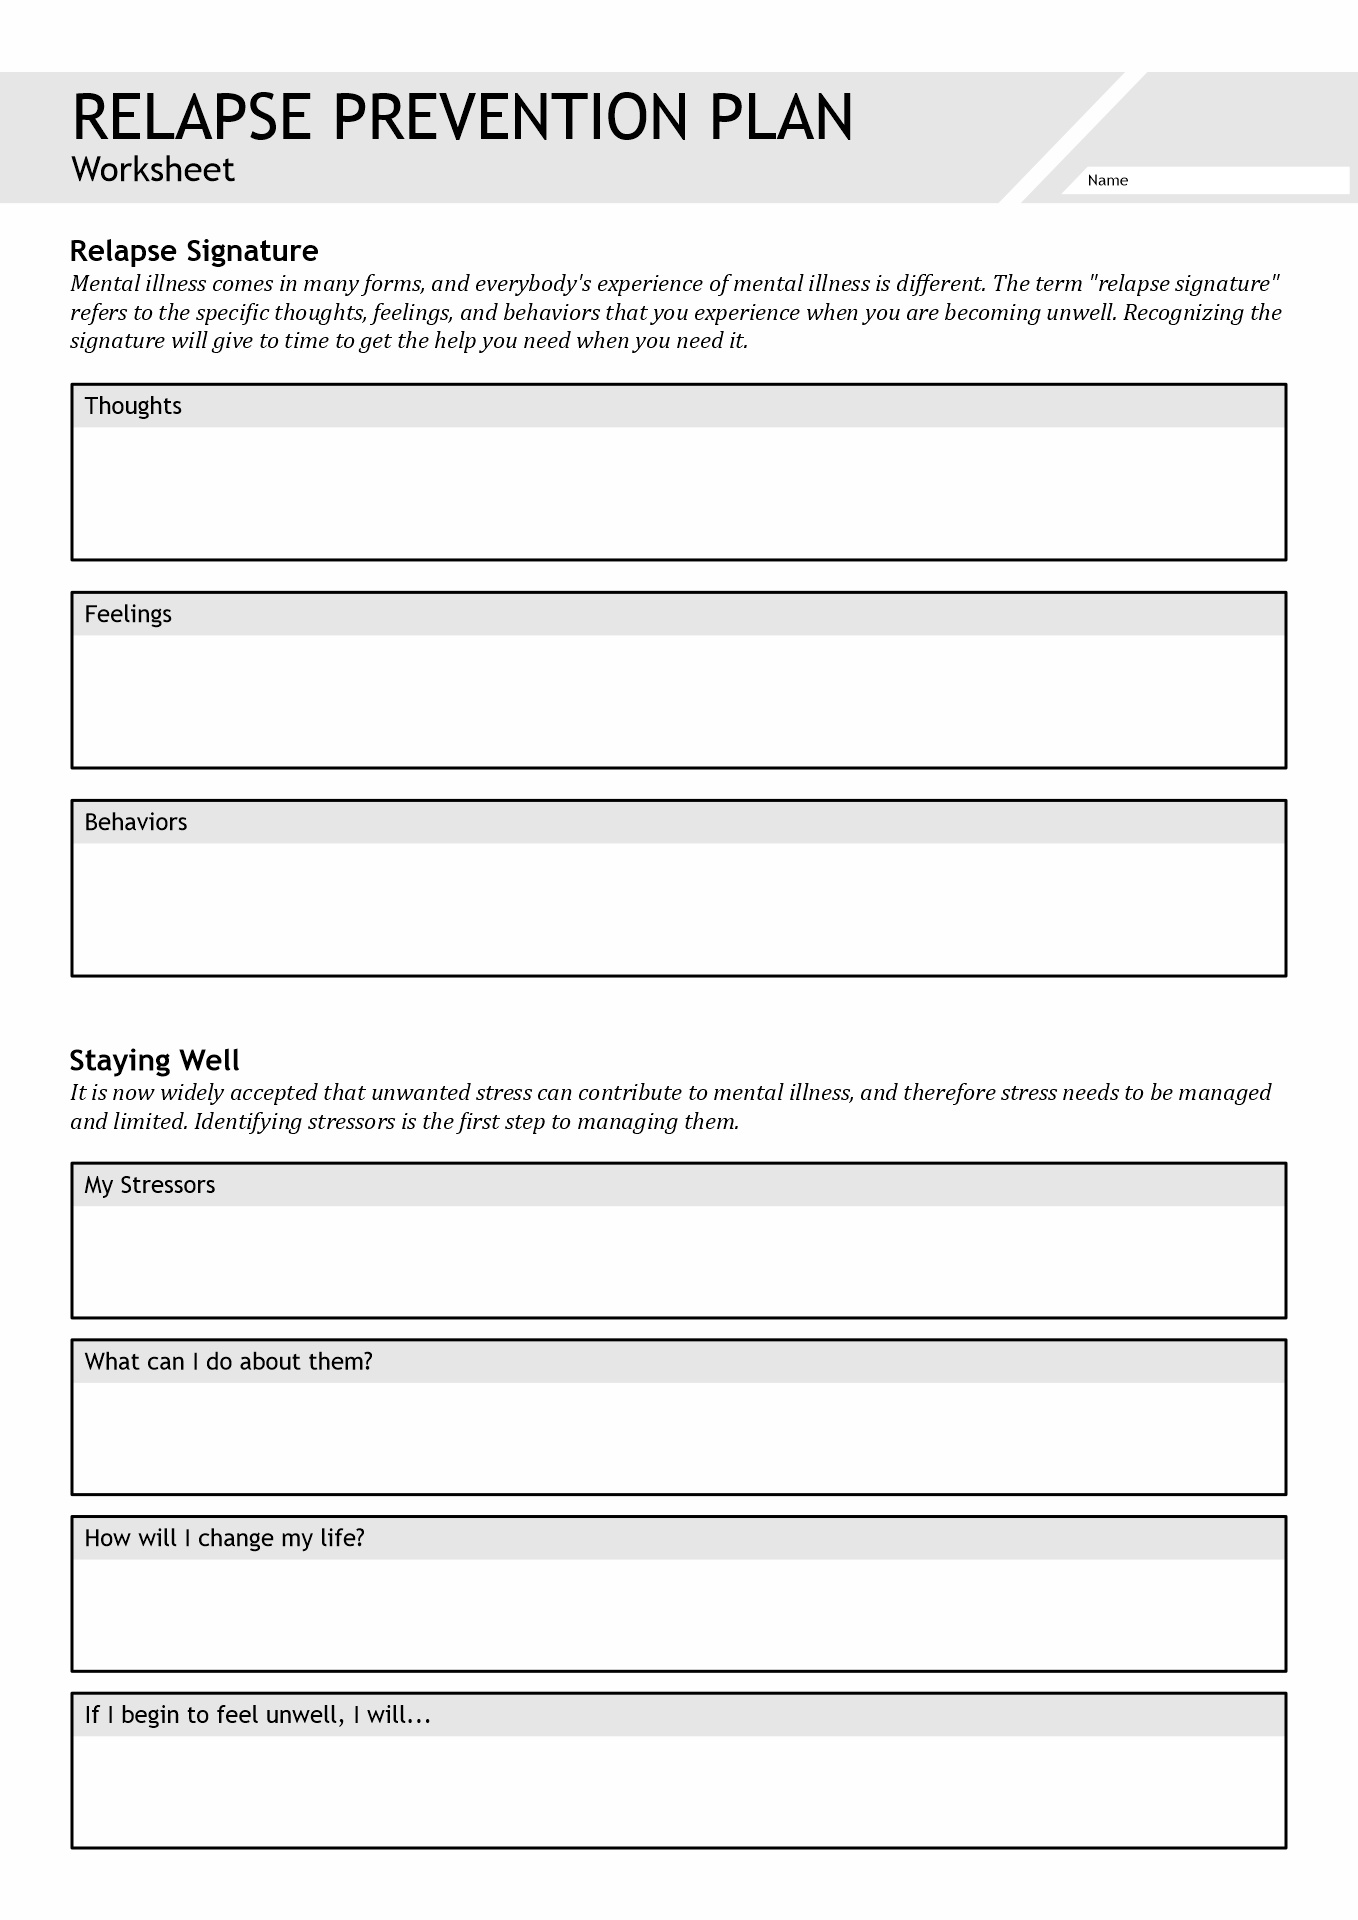 Free Substance Abuse Worksheets for Adults Image